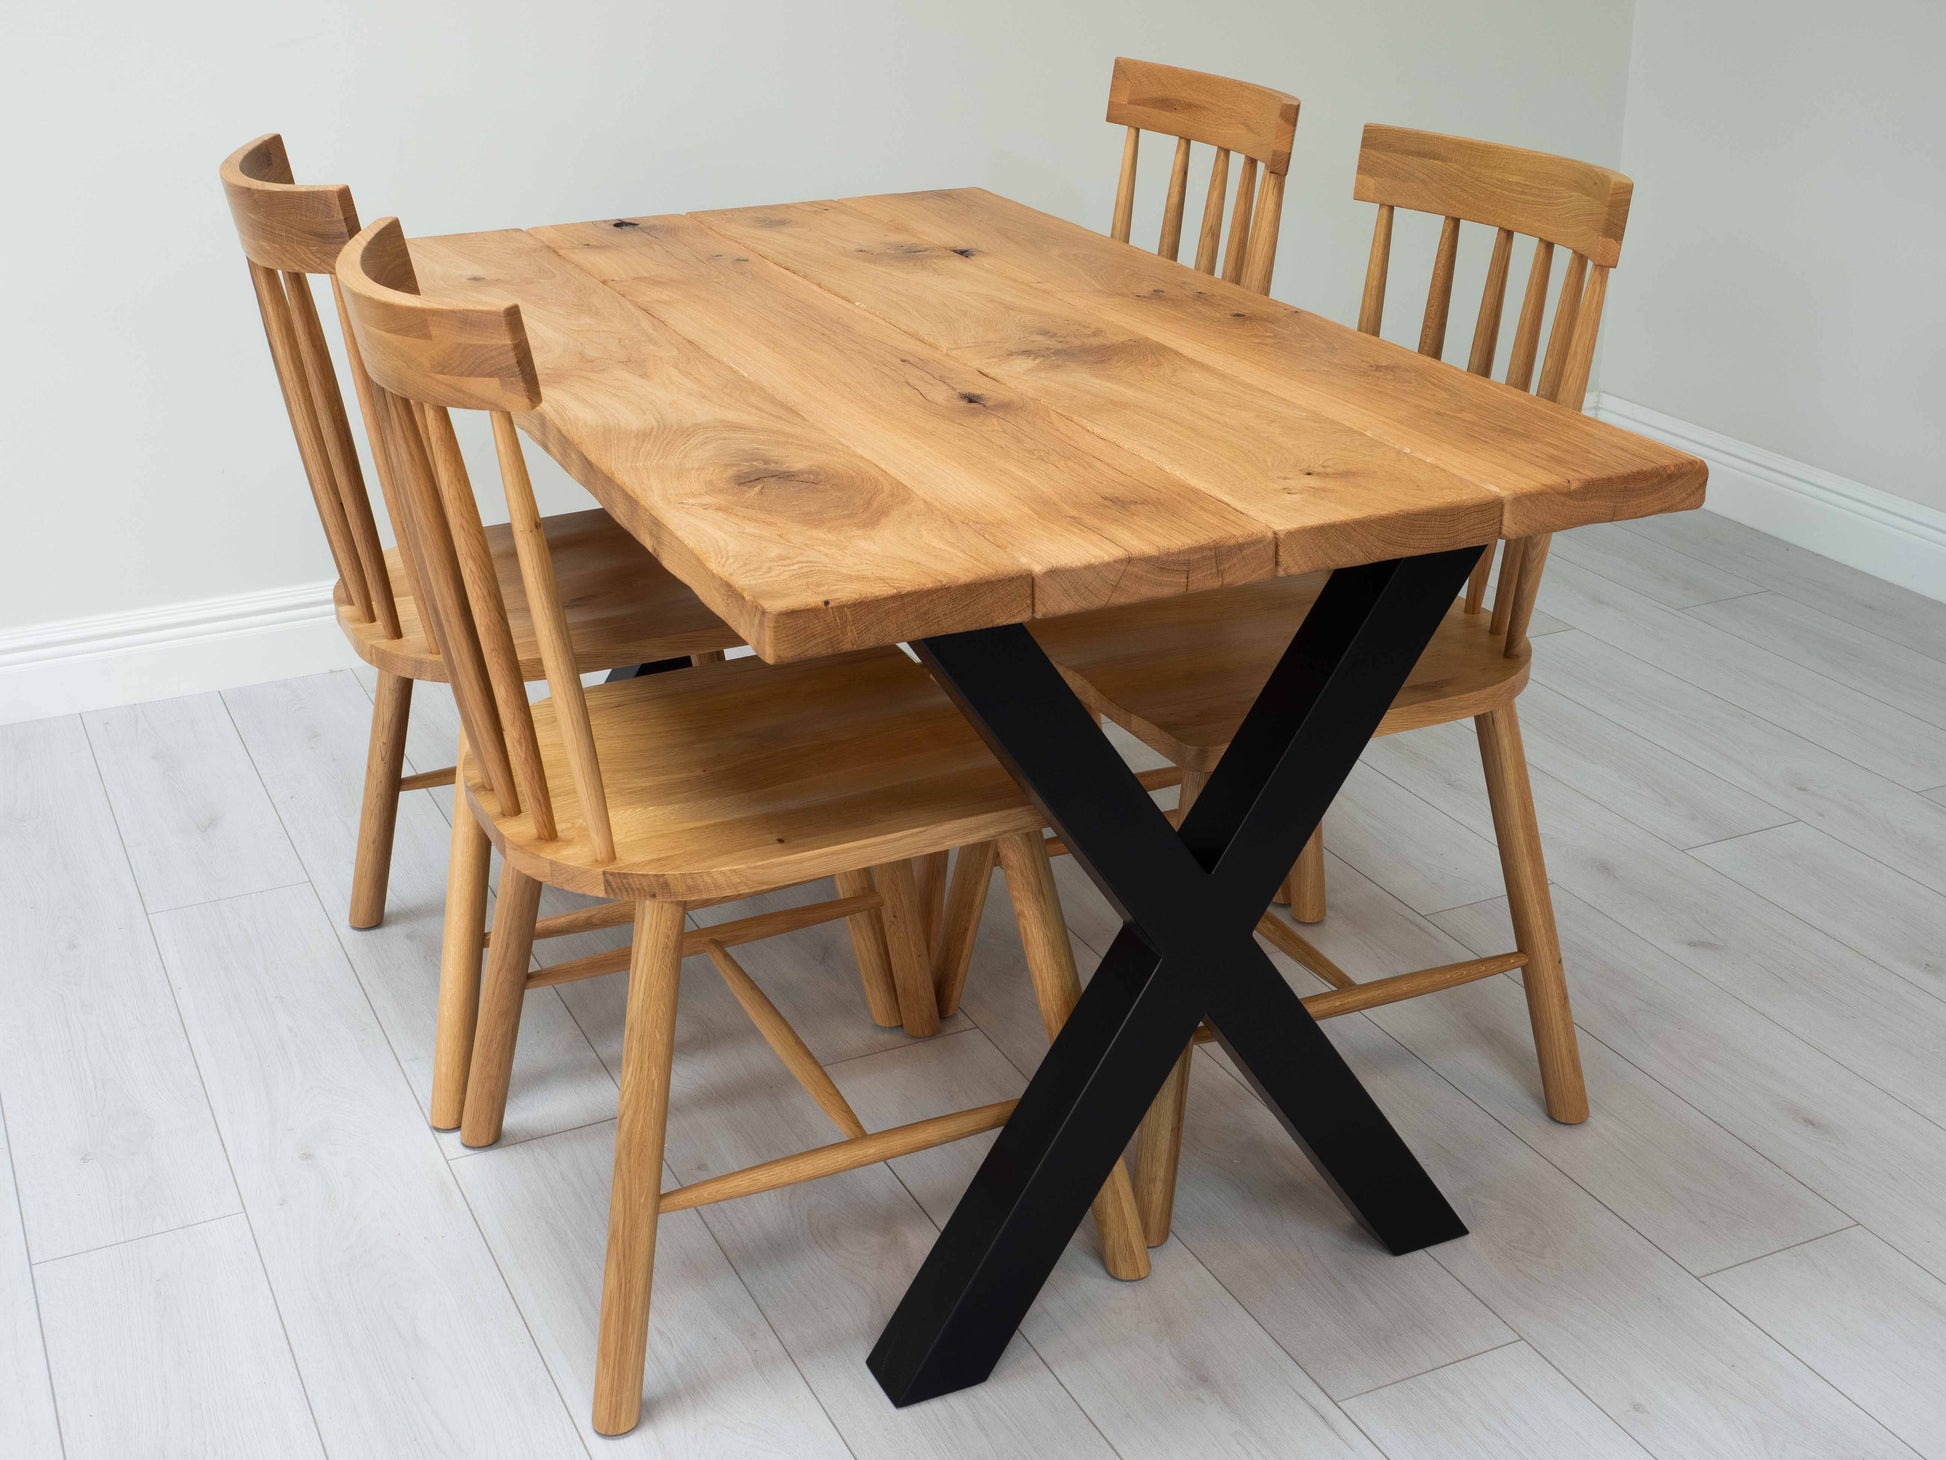 Rustic Plank Dining Table